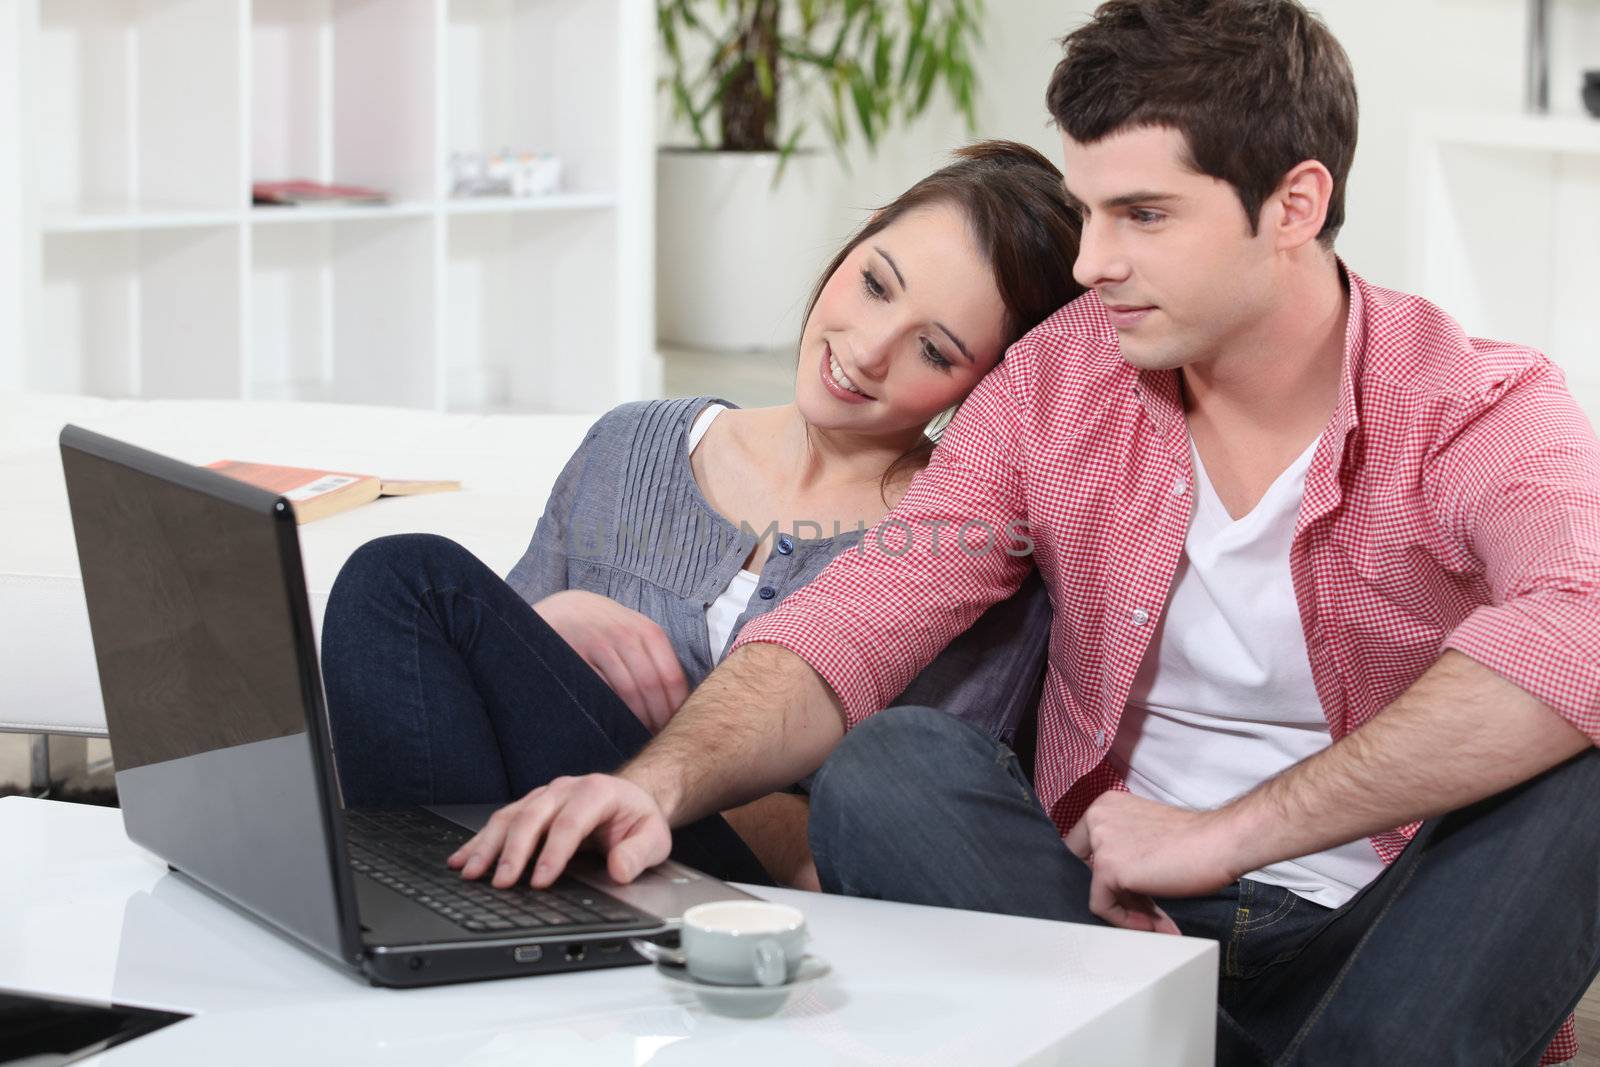 Couple relaxing at home in front of their laptop